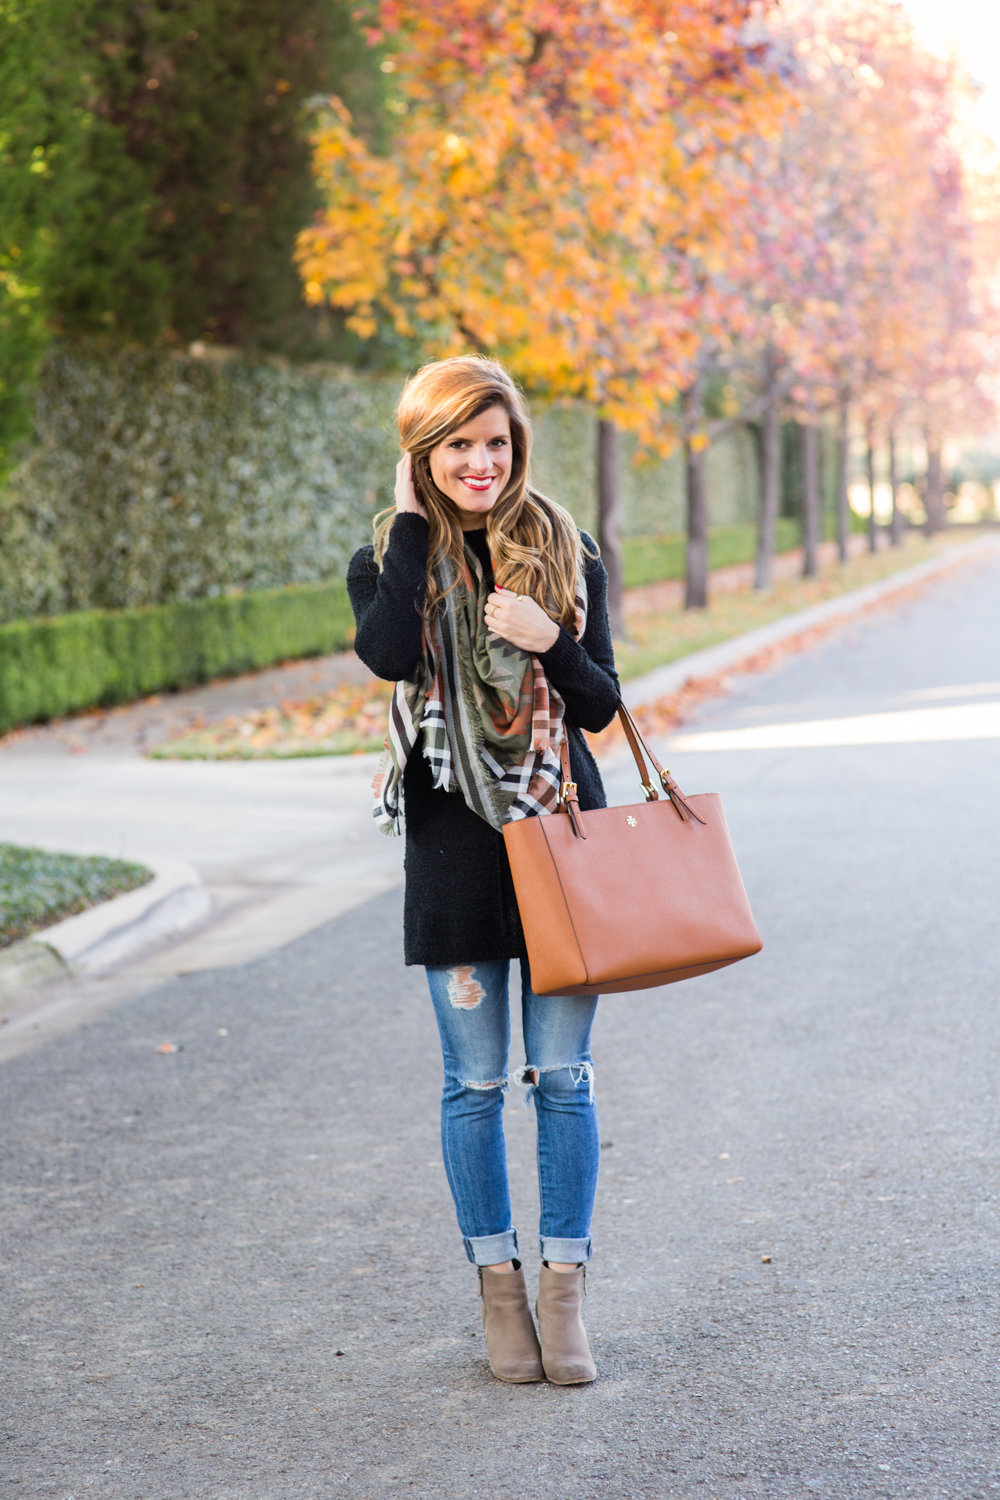 Tunic and Scarf Outfit + Ripped Jeans + Ankle Booties